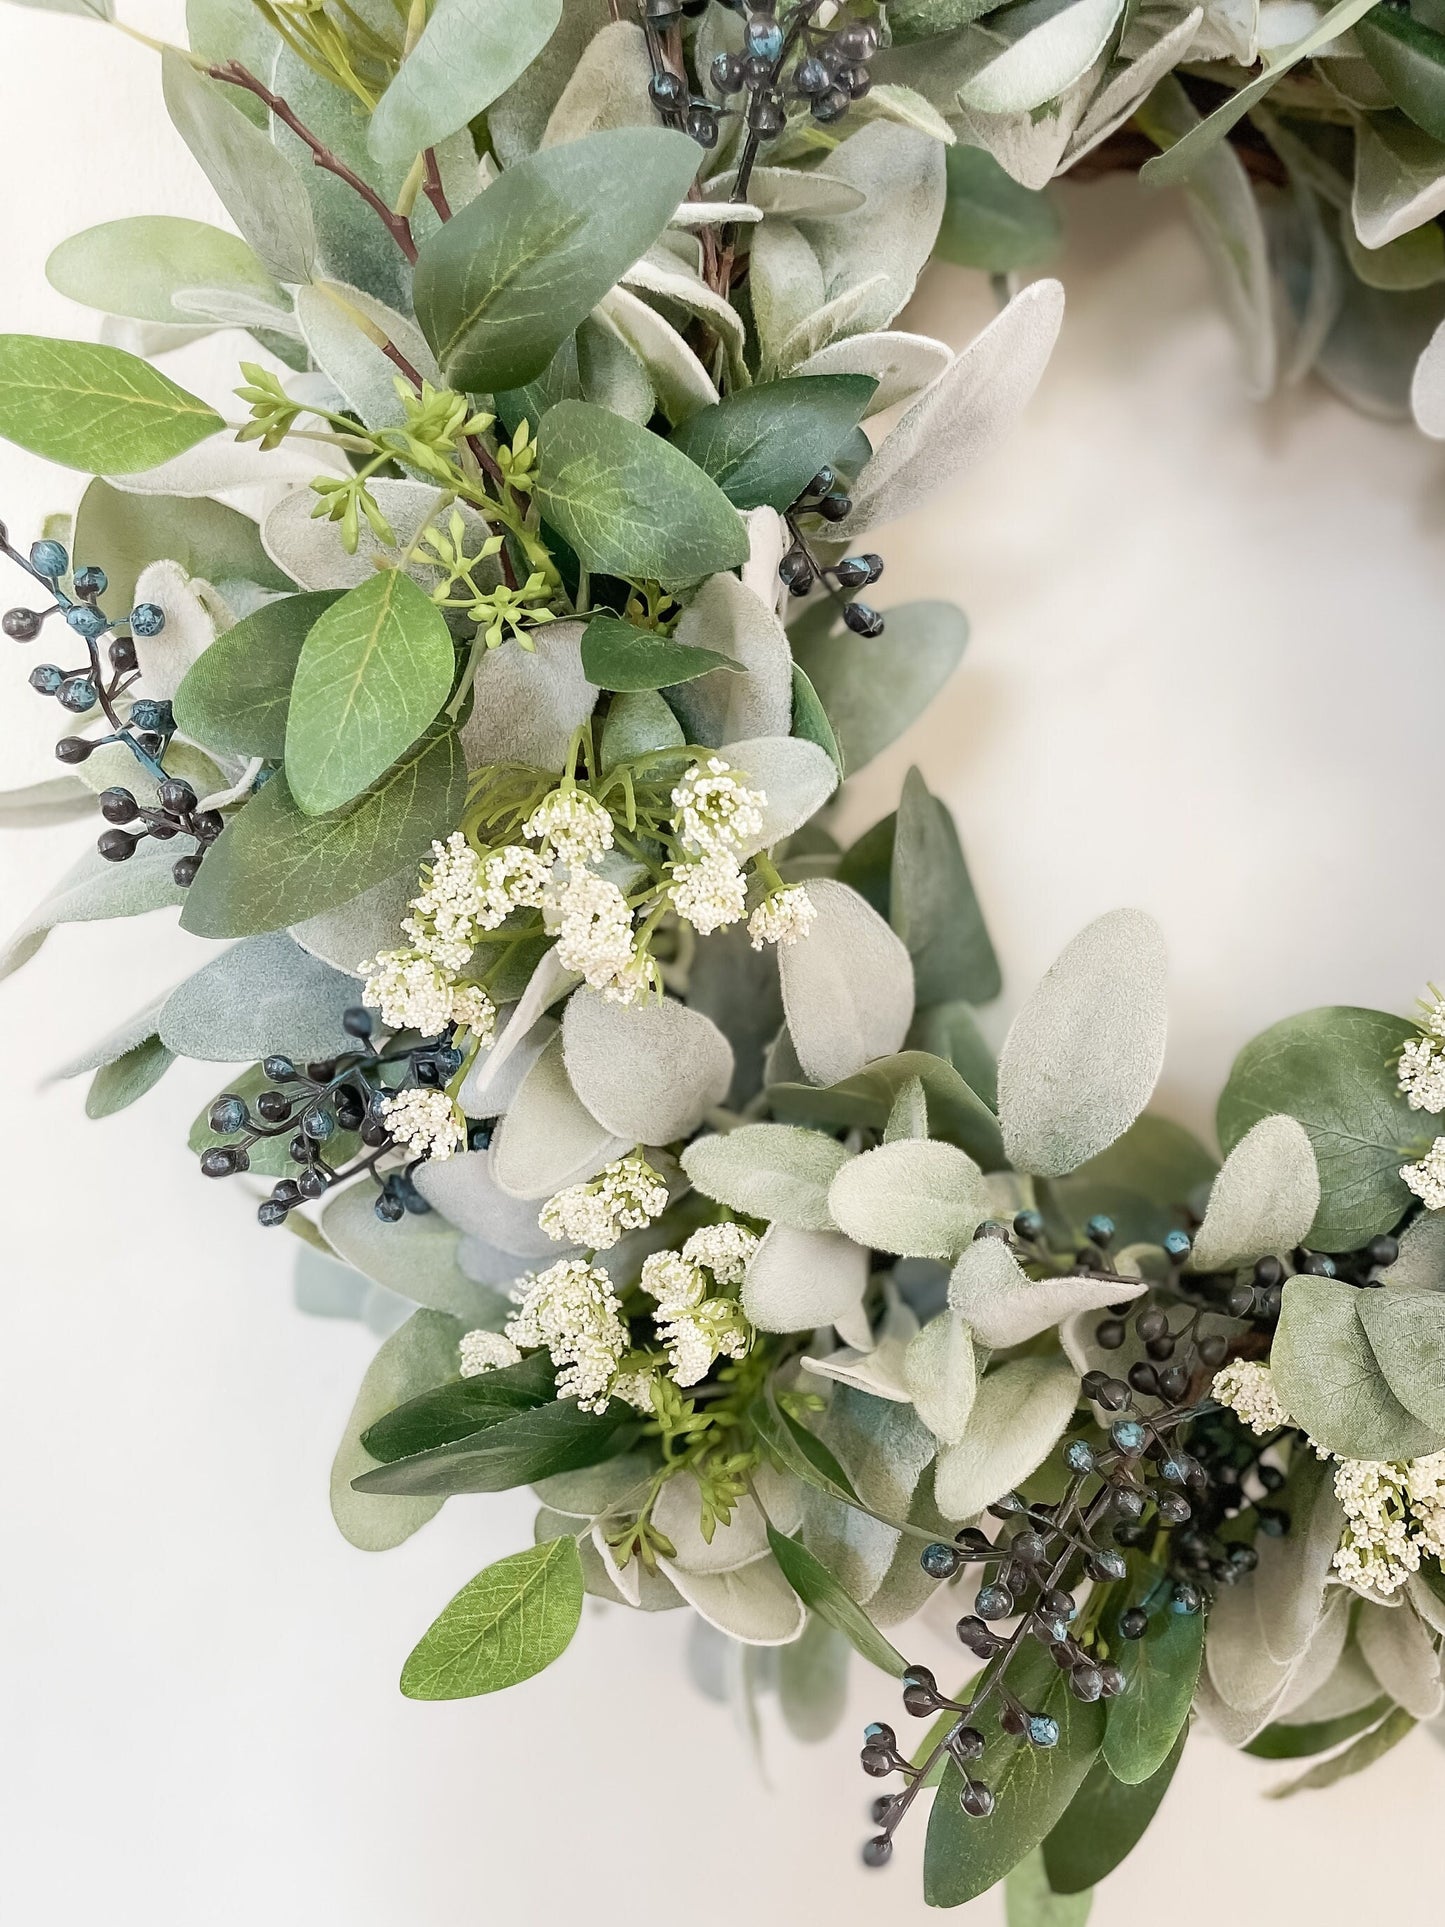 Lambs Ear Wreath w/Blue Berries, Eucalyptus and White Flower Wreath, Every Day Wreath for Front Door, Fall & Winter Wreath, Year Round Decor